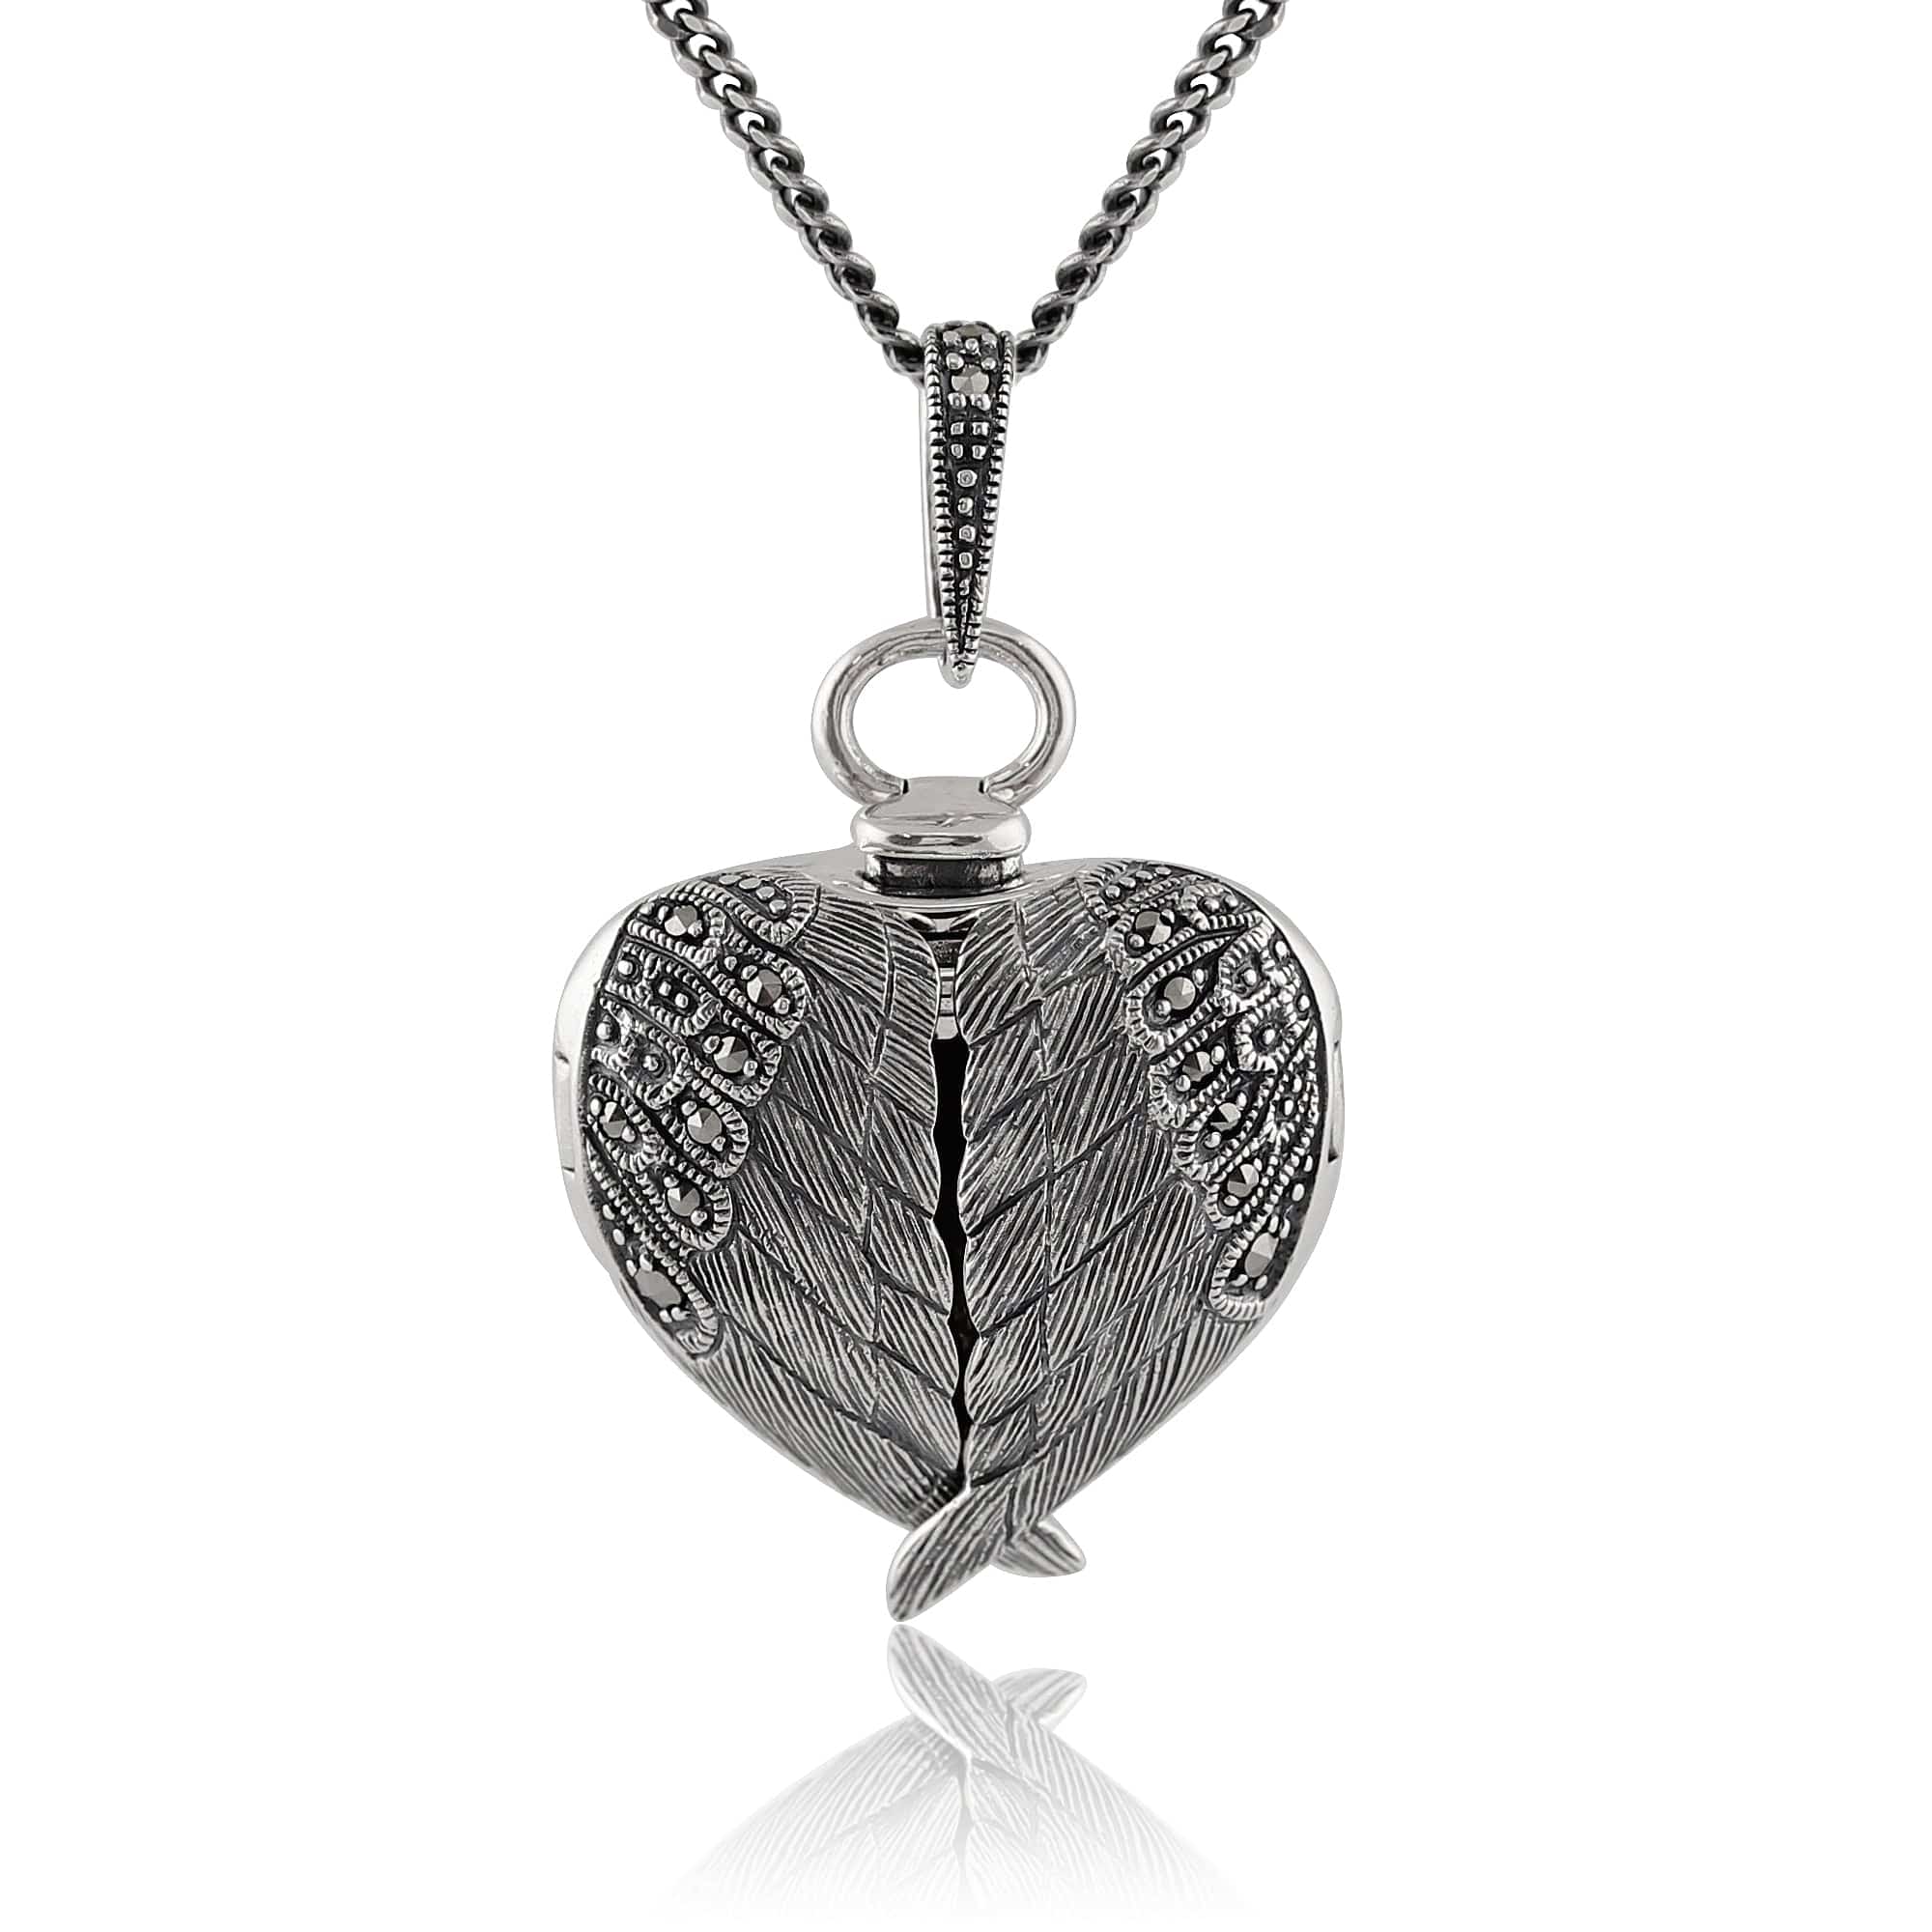 Photos - Pendant / Choker Necklace Art Nouveau Style Round Marcasite Angel Wing Heart Locket on Chain in 925